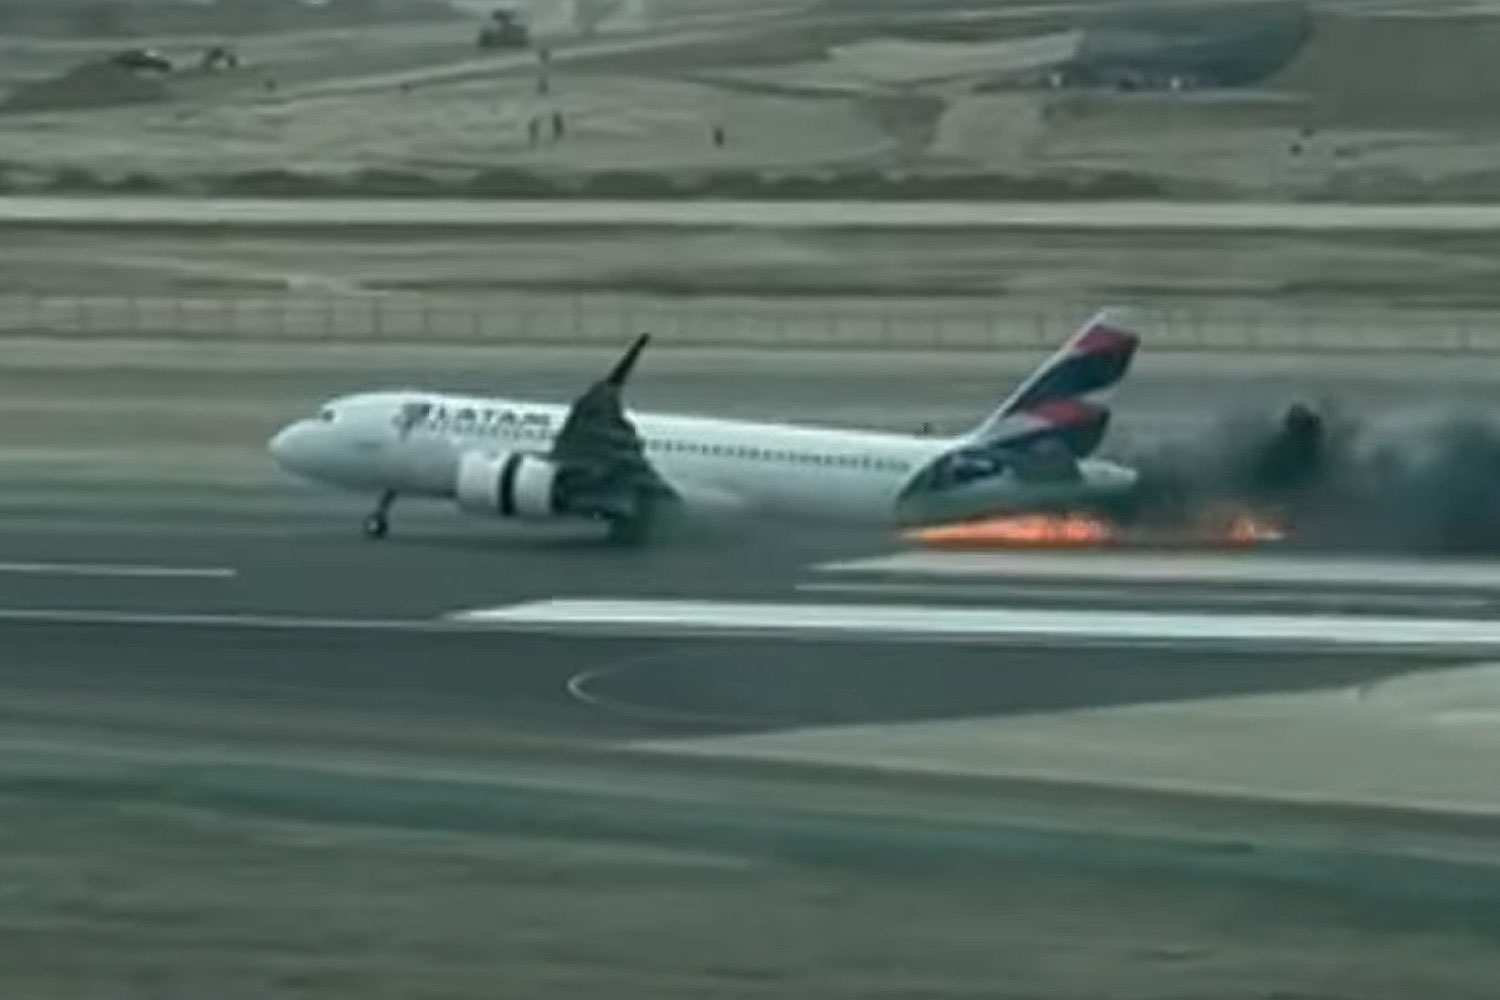 ACCIDENT: LATAM A321 Has Tail Strike And Flies On! - Mentour Pilot